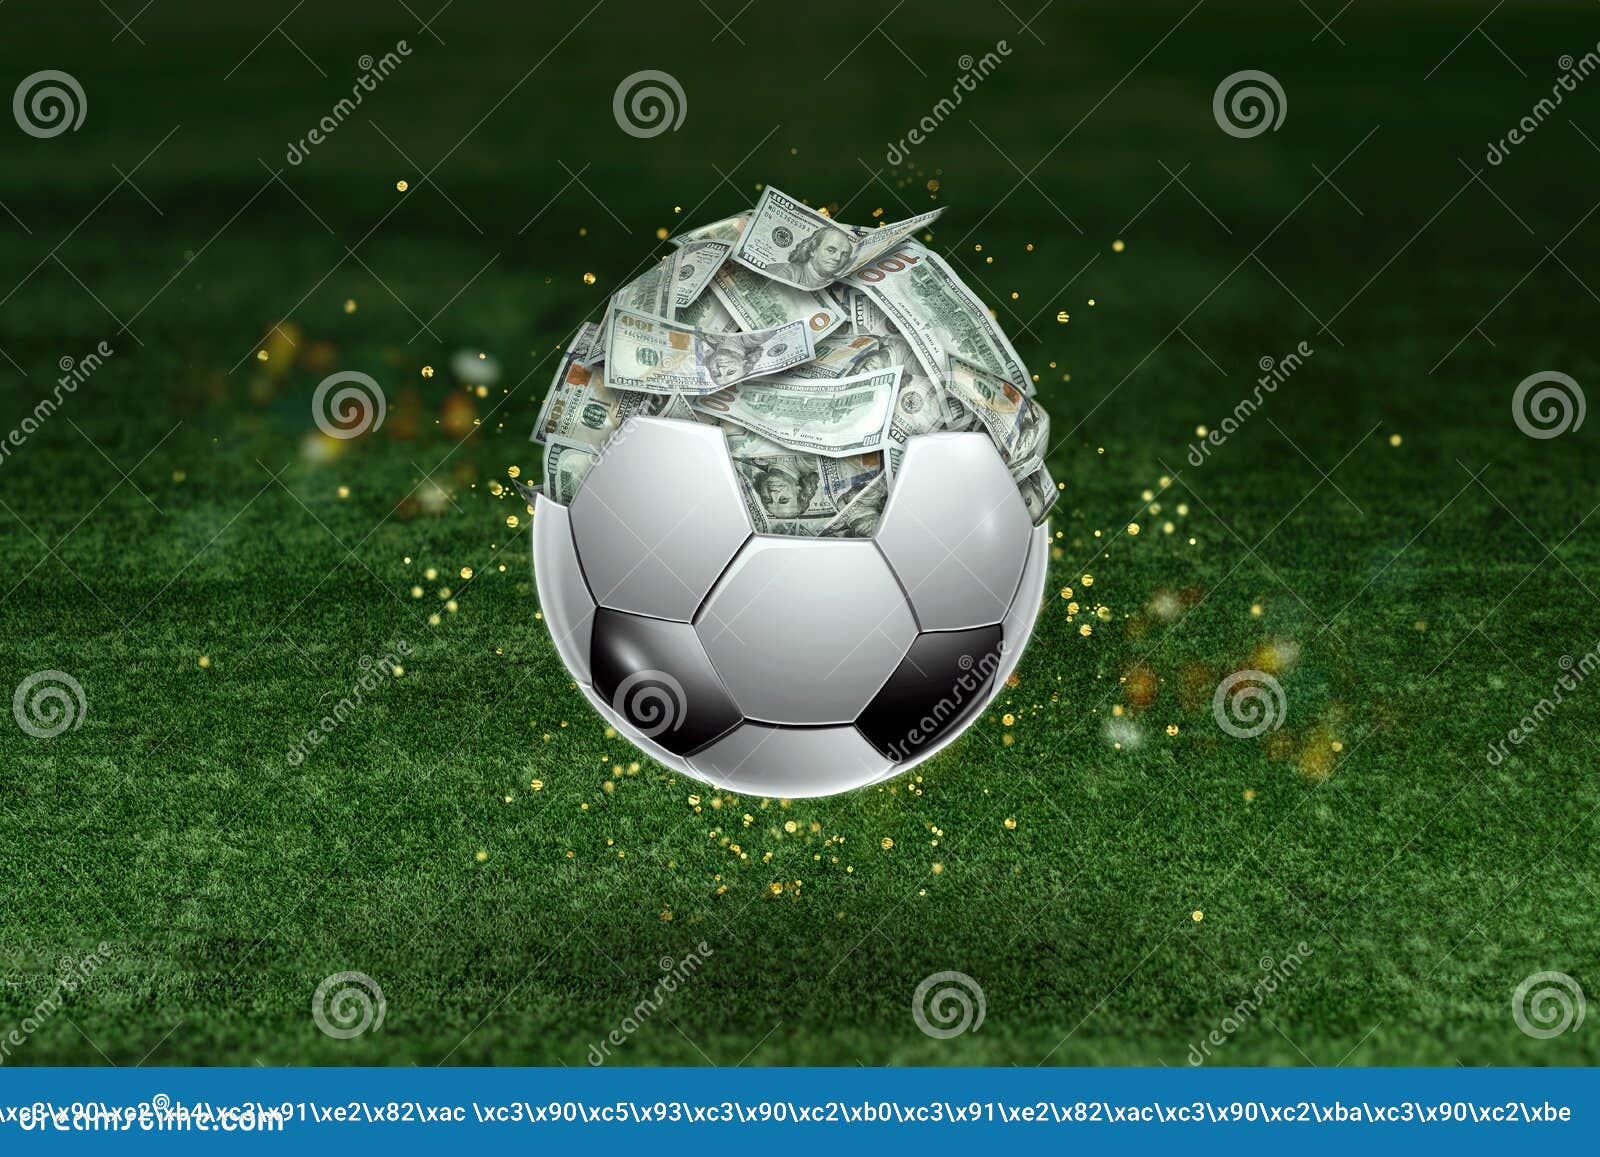 dollars are inside the soccer ball, the ball is full of money. sports betting, soccer betting, gambling, bookmaker, big win